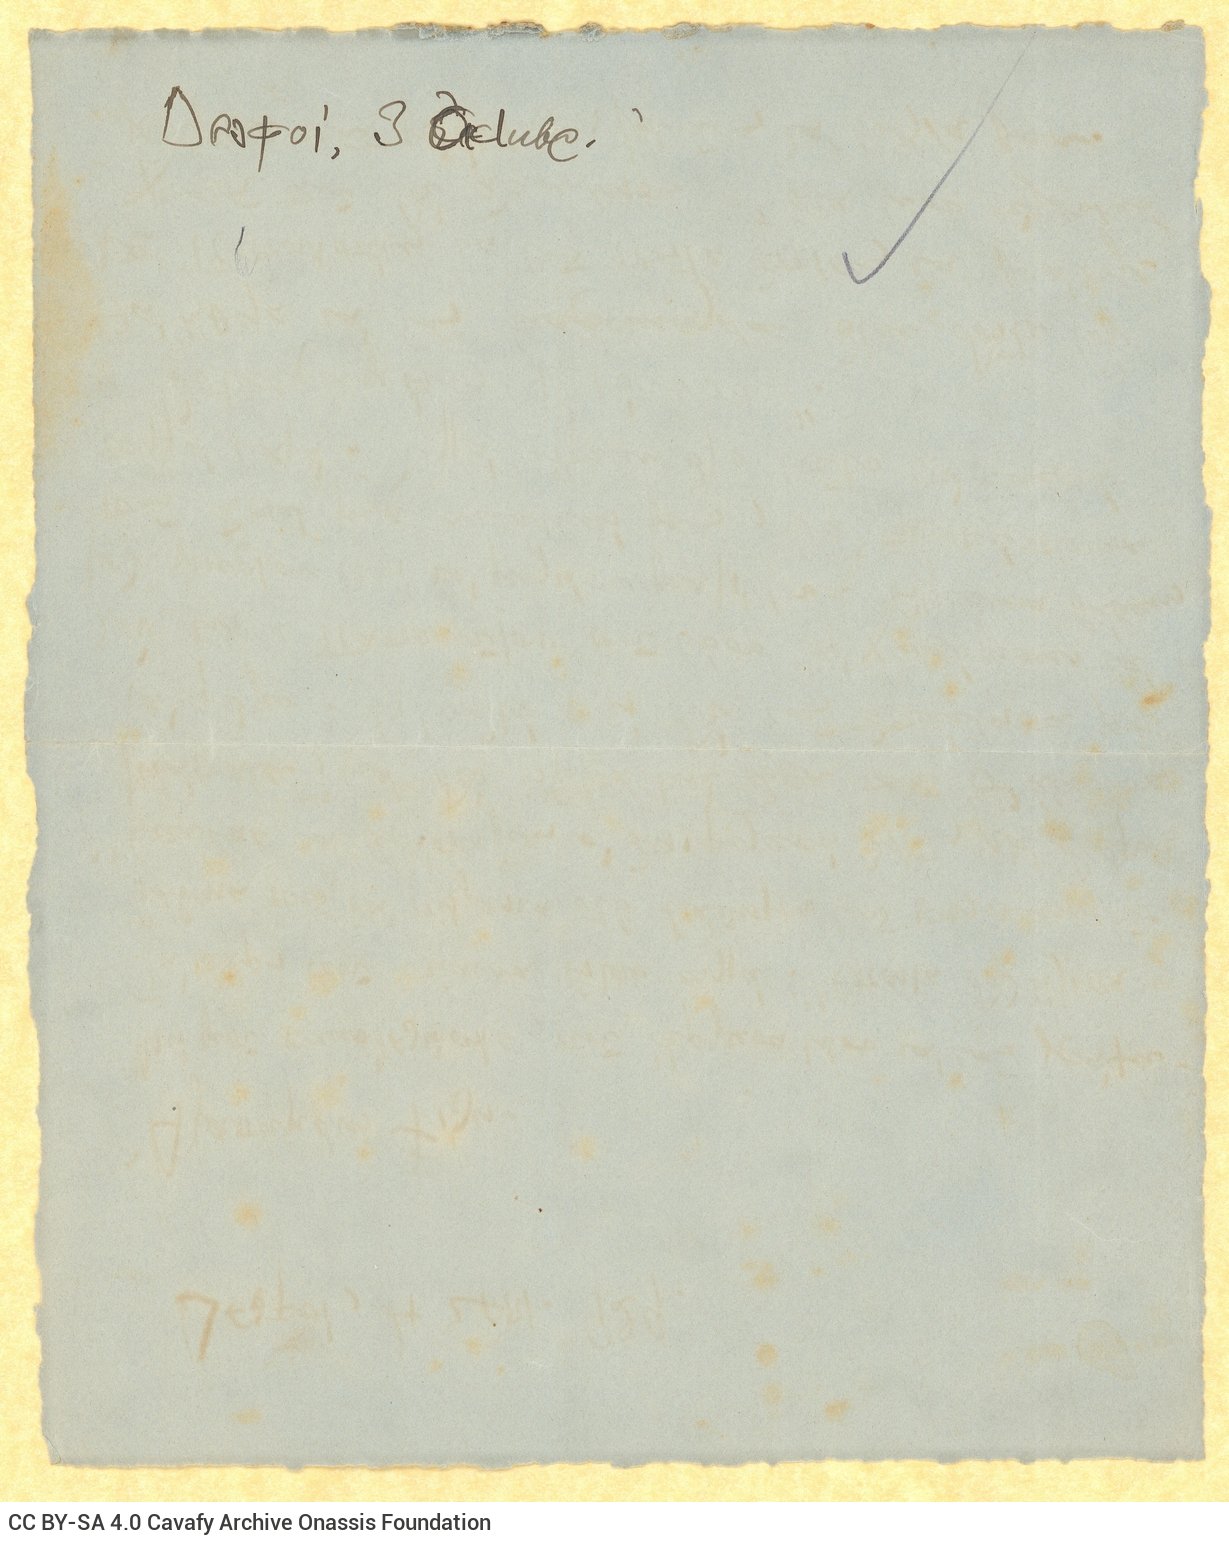 Handwritten letter by Angelos Sikelianos, possibly to Rica Singopoulo, on the recto of two sheets. Reference to individuals l